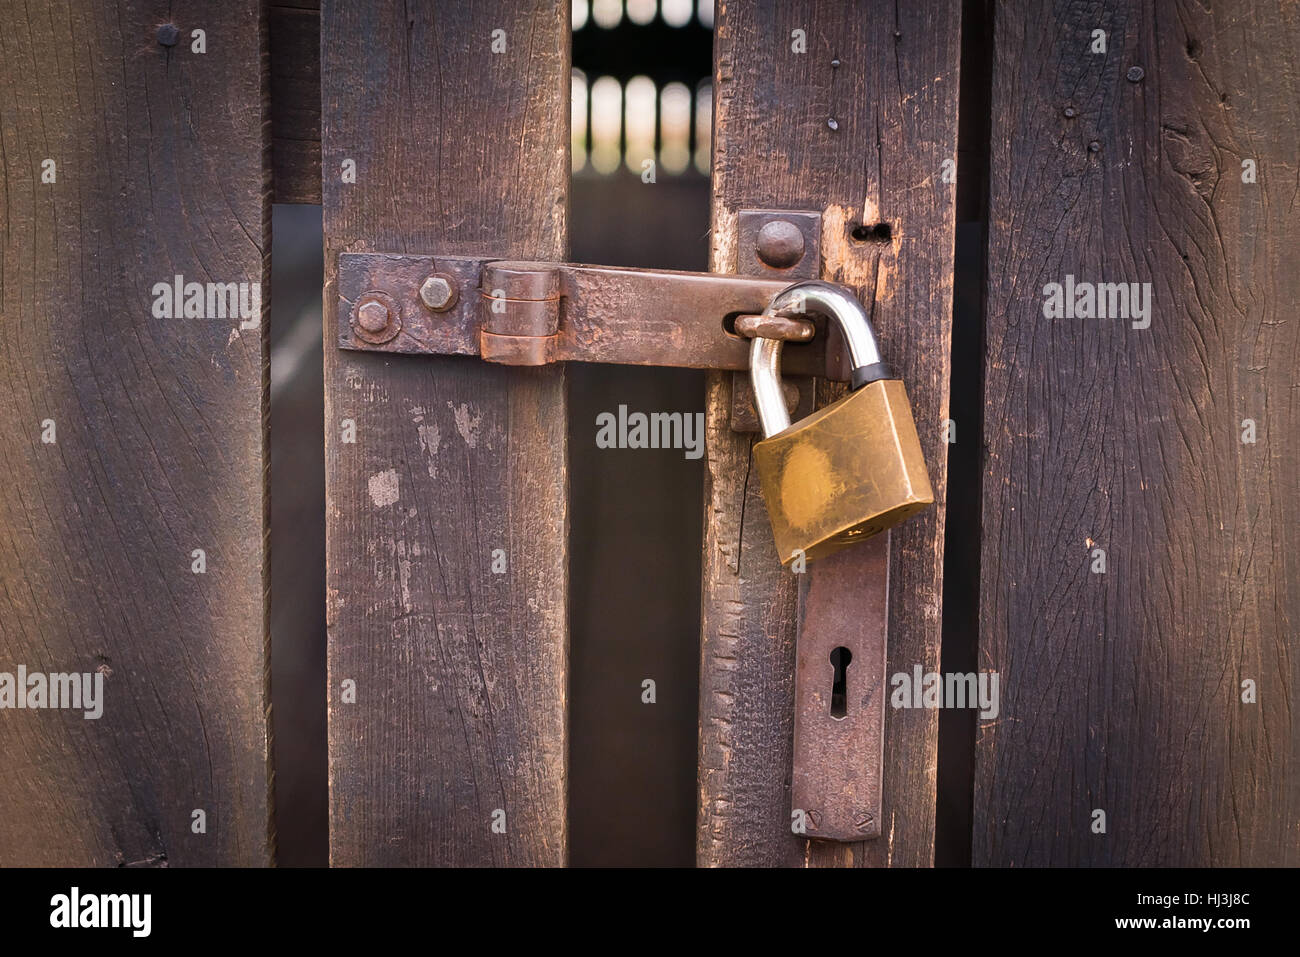 Close up view of a padlock with an old metal hasp and staple on an old wooden door Stock Photo